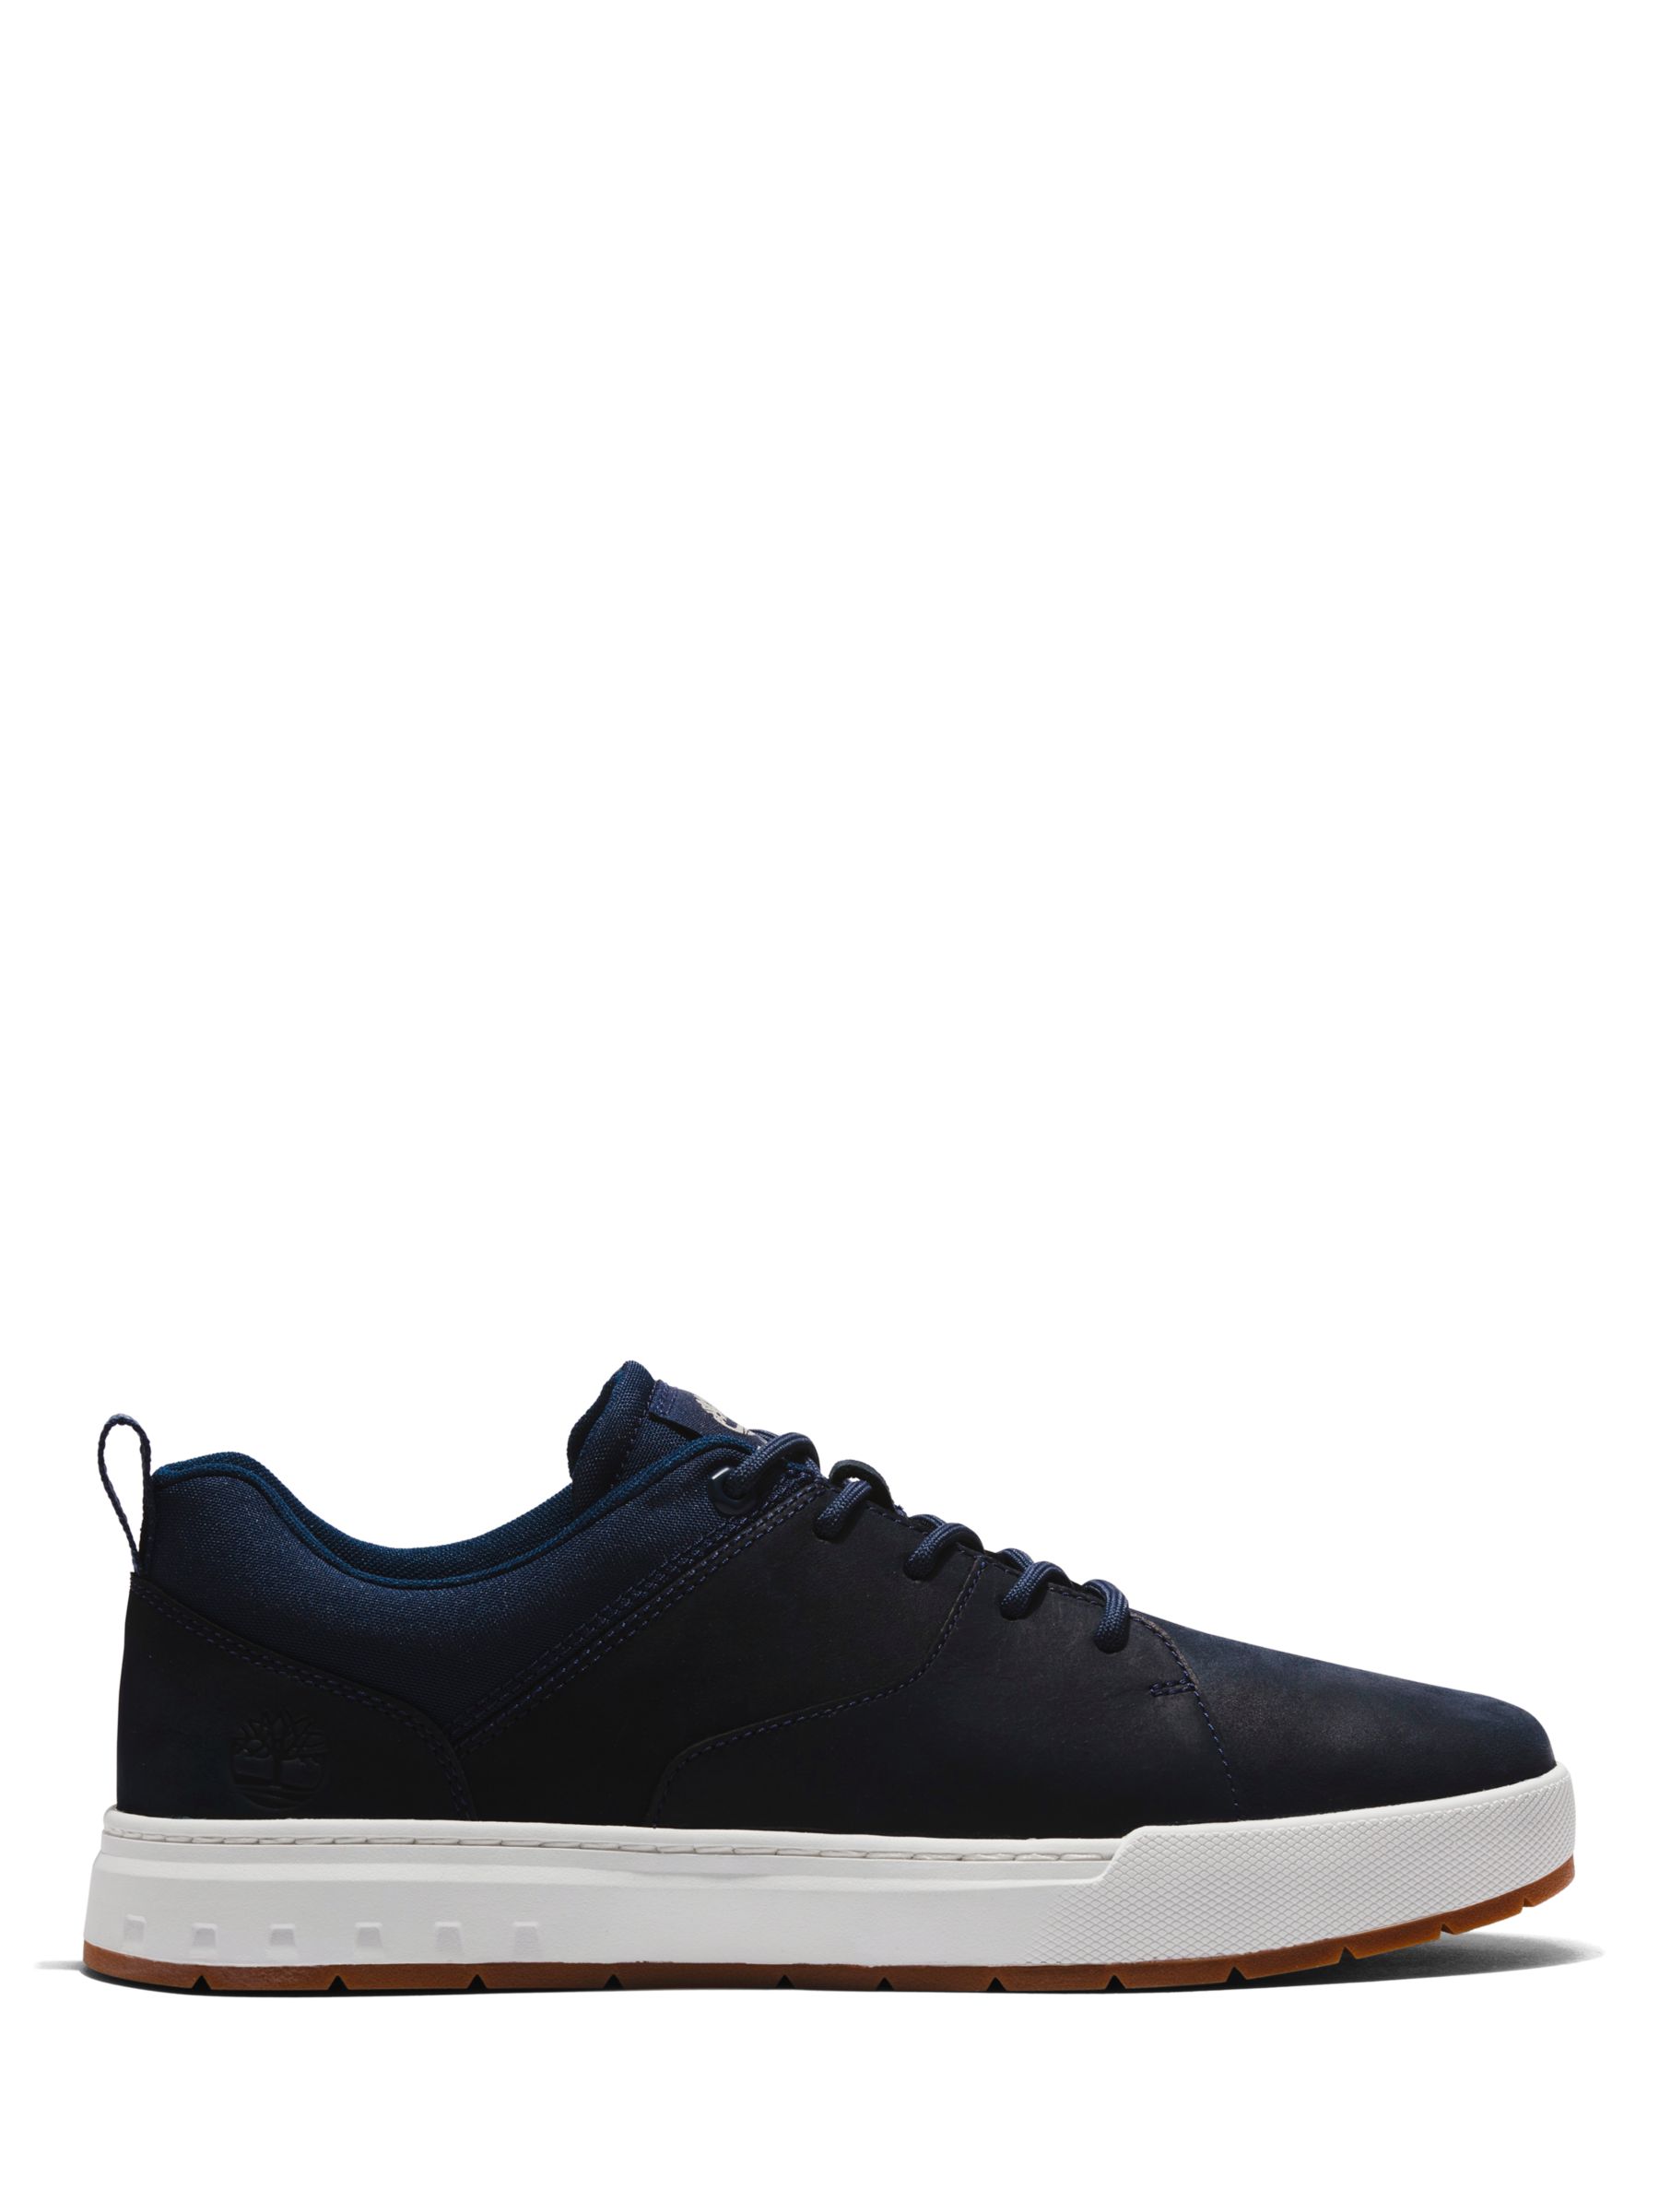 Timberland Maple Grove Trainers, Navy at John Lewis & Partners